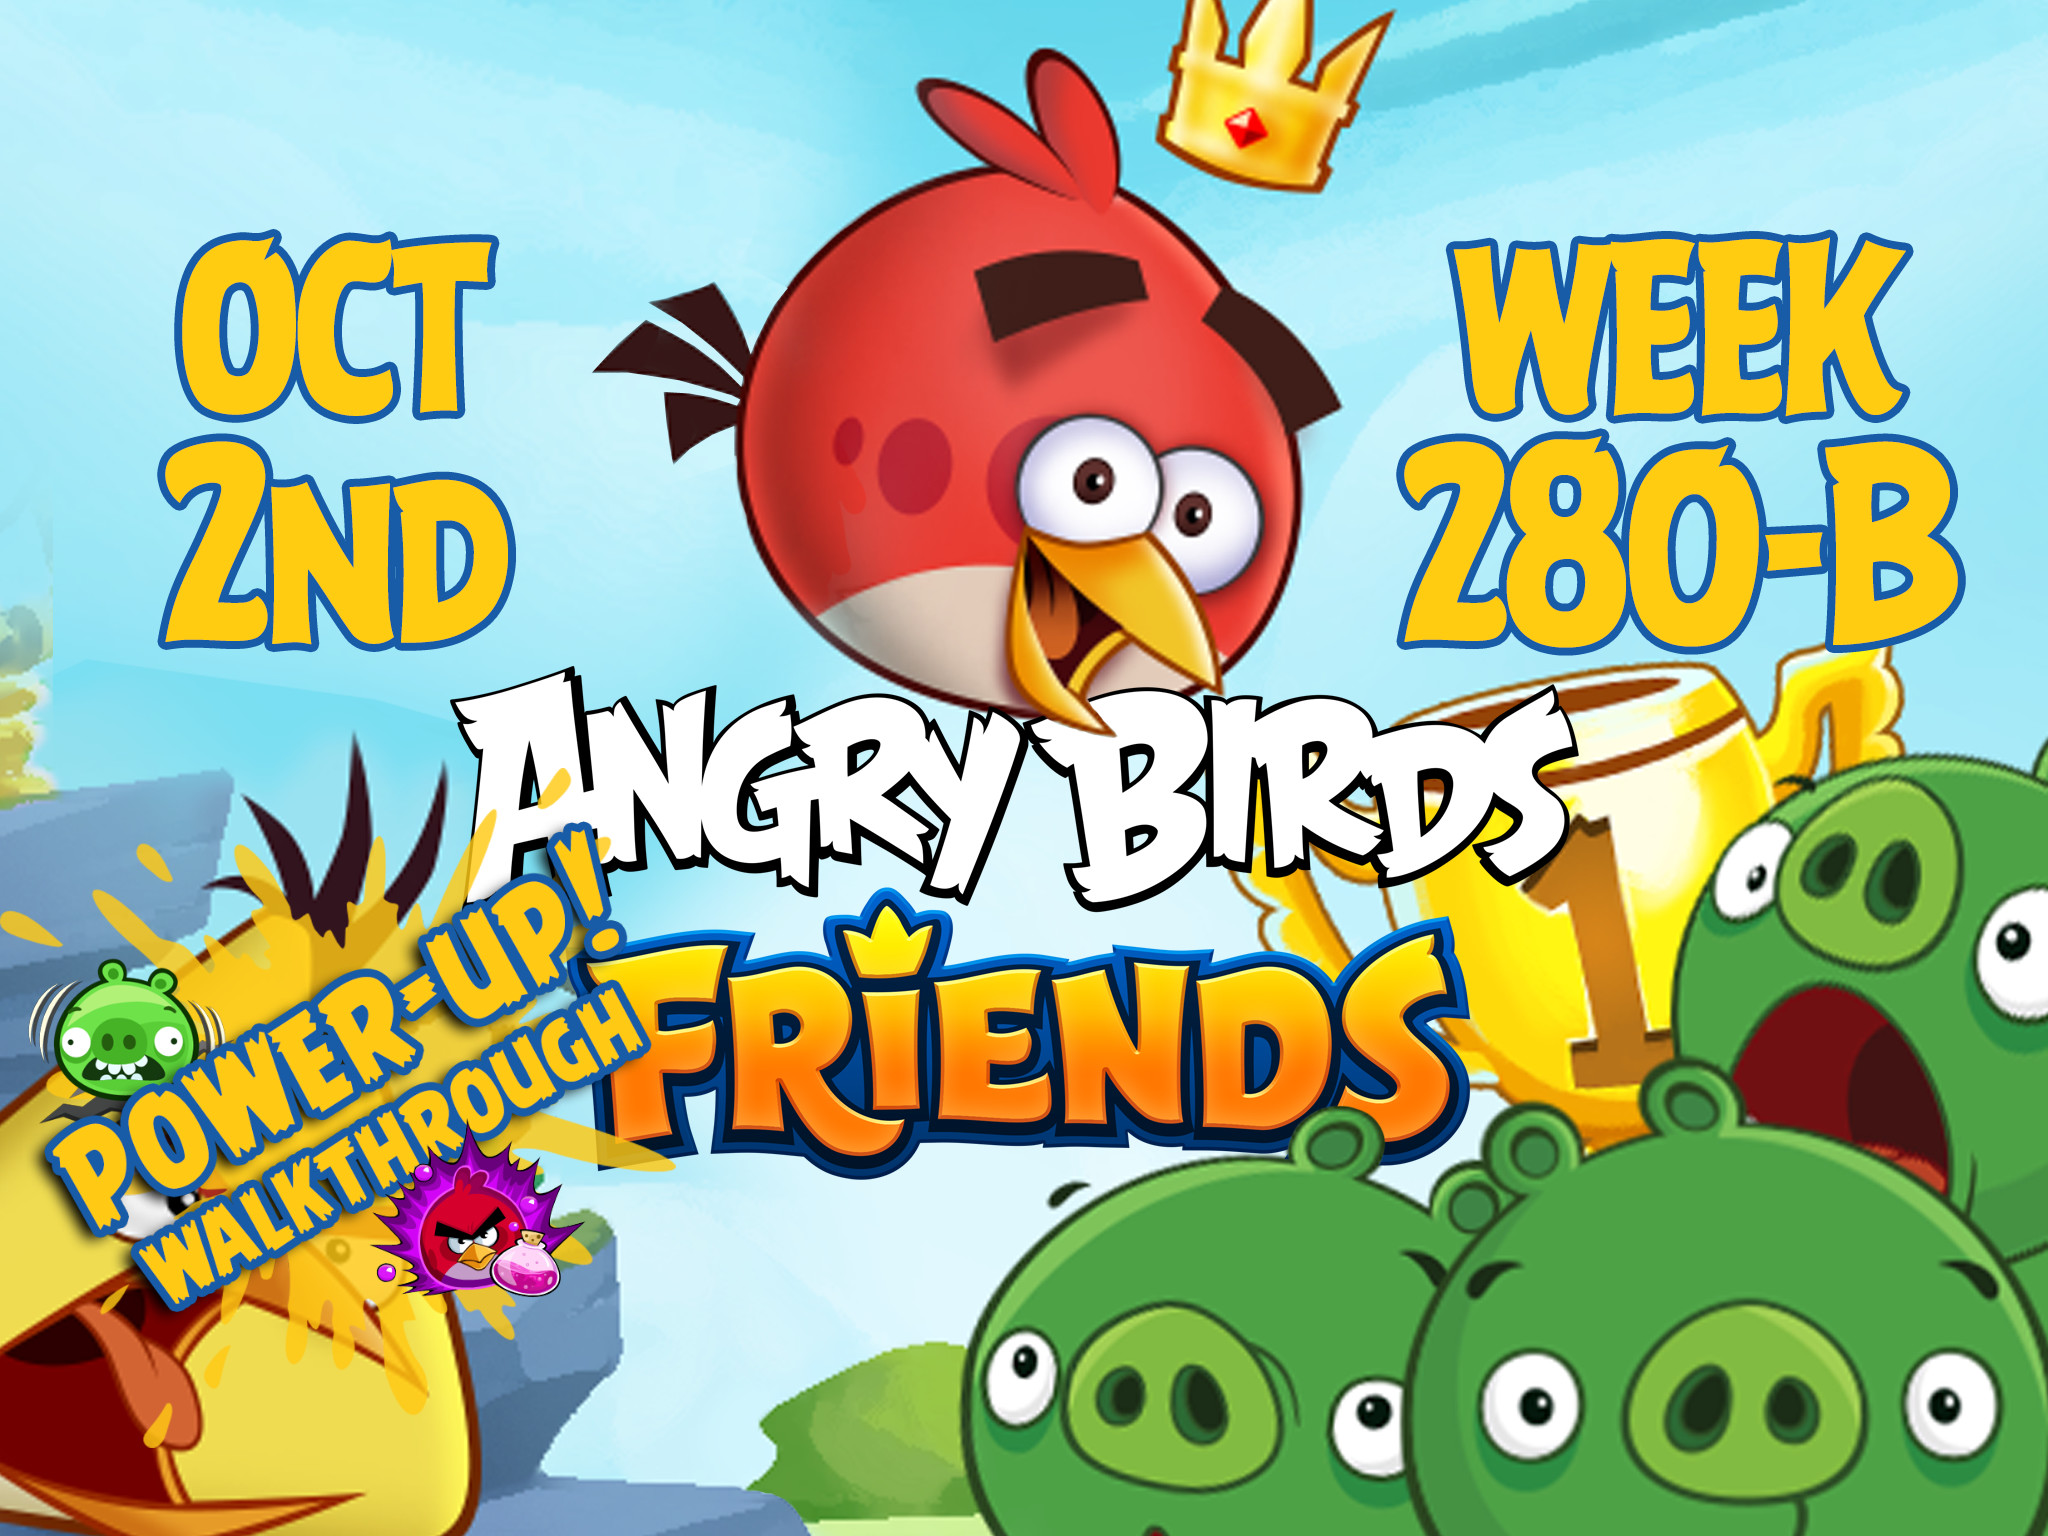 Angry Birds Friends Tournament Week 280-B Feature Image PU